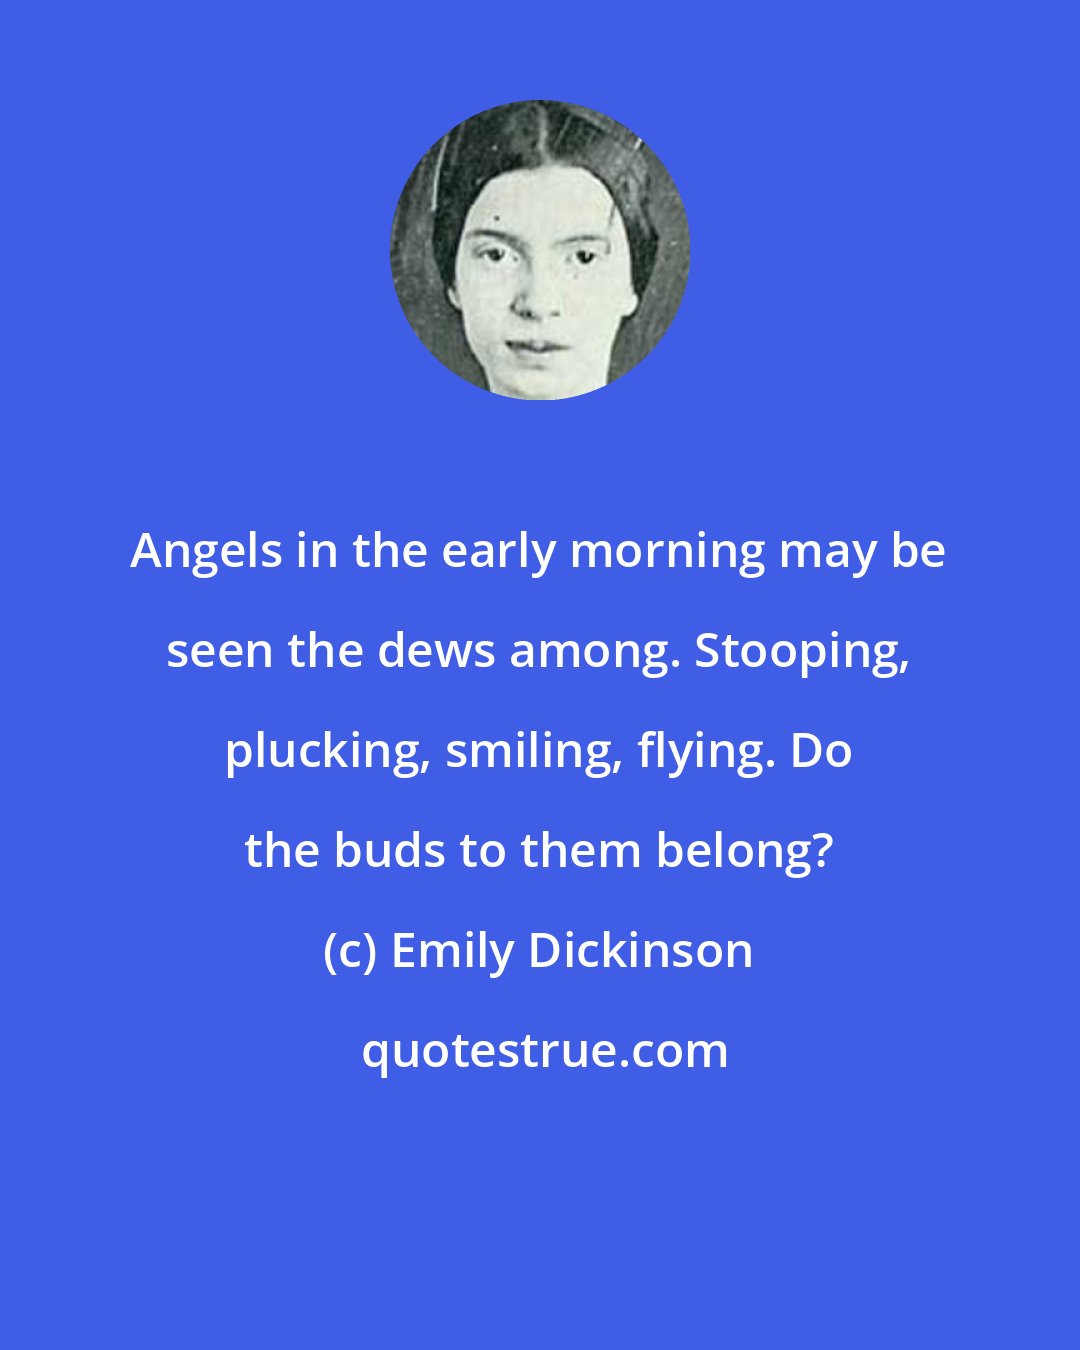 Emily Dickinson: Angels in the early morning may be seen the dews among. Stooping, plucking, smiling, flying. Do the buds to them belong?